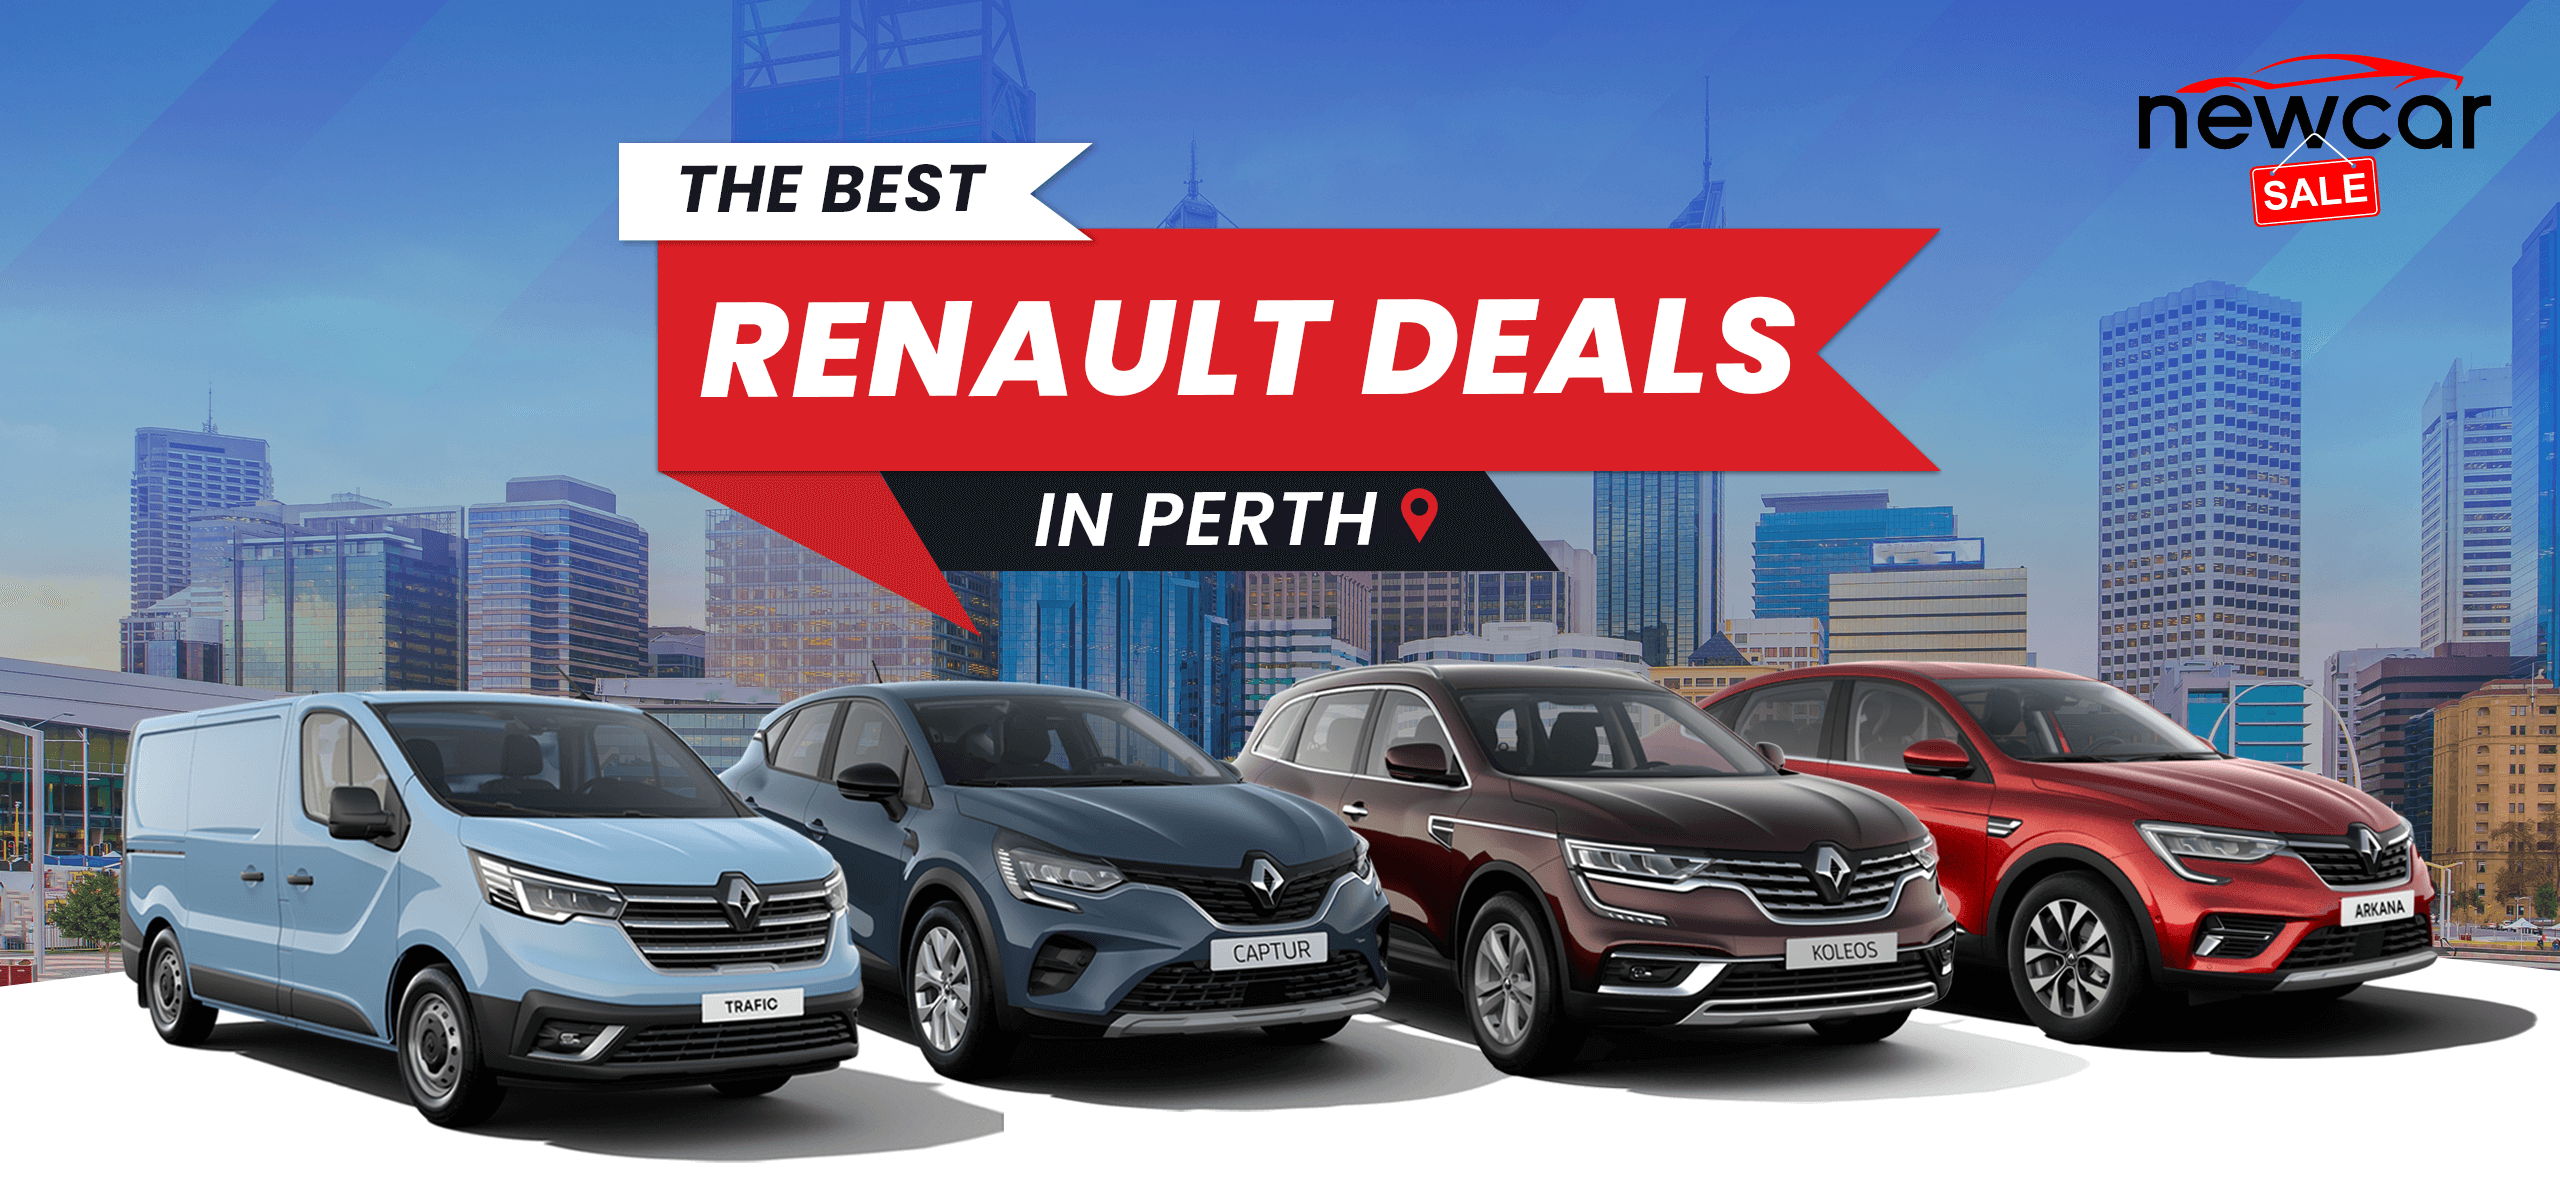 The Best Renault Deals in Perth